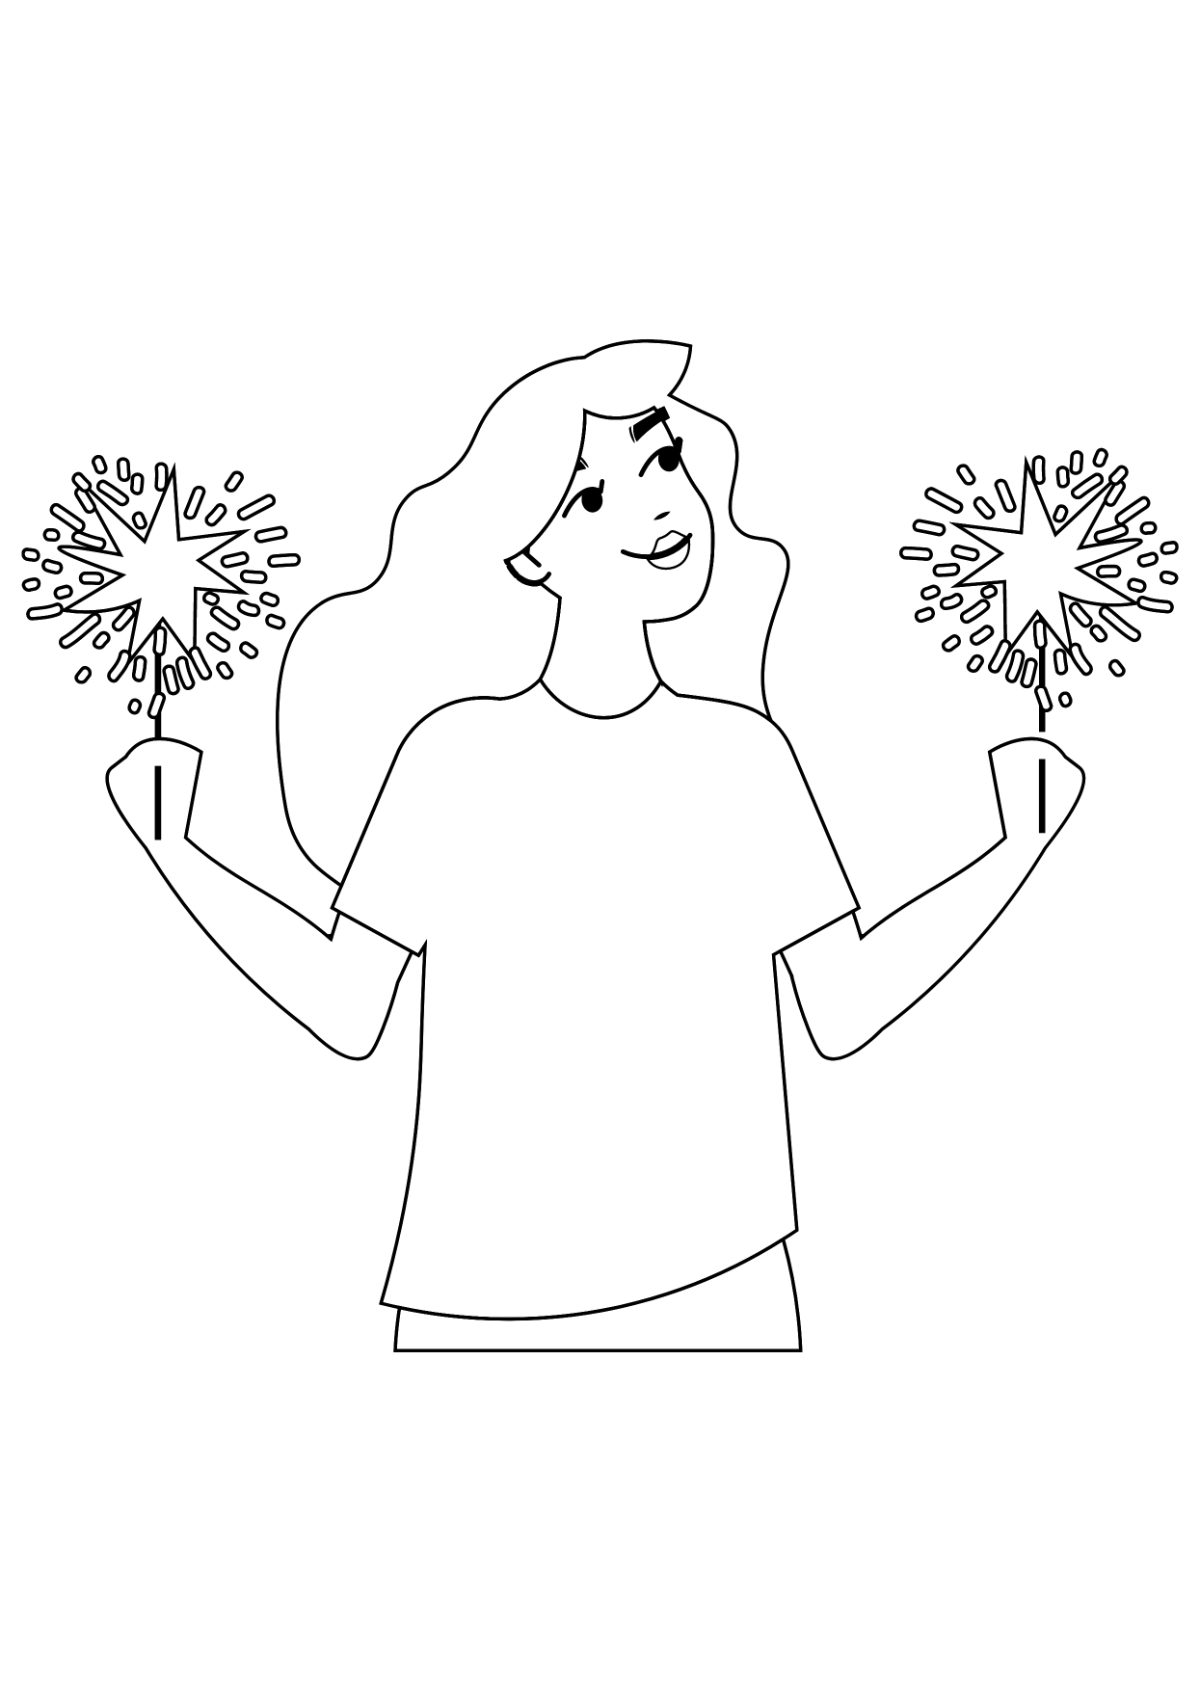 Free New Year Celebration Drawing Template